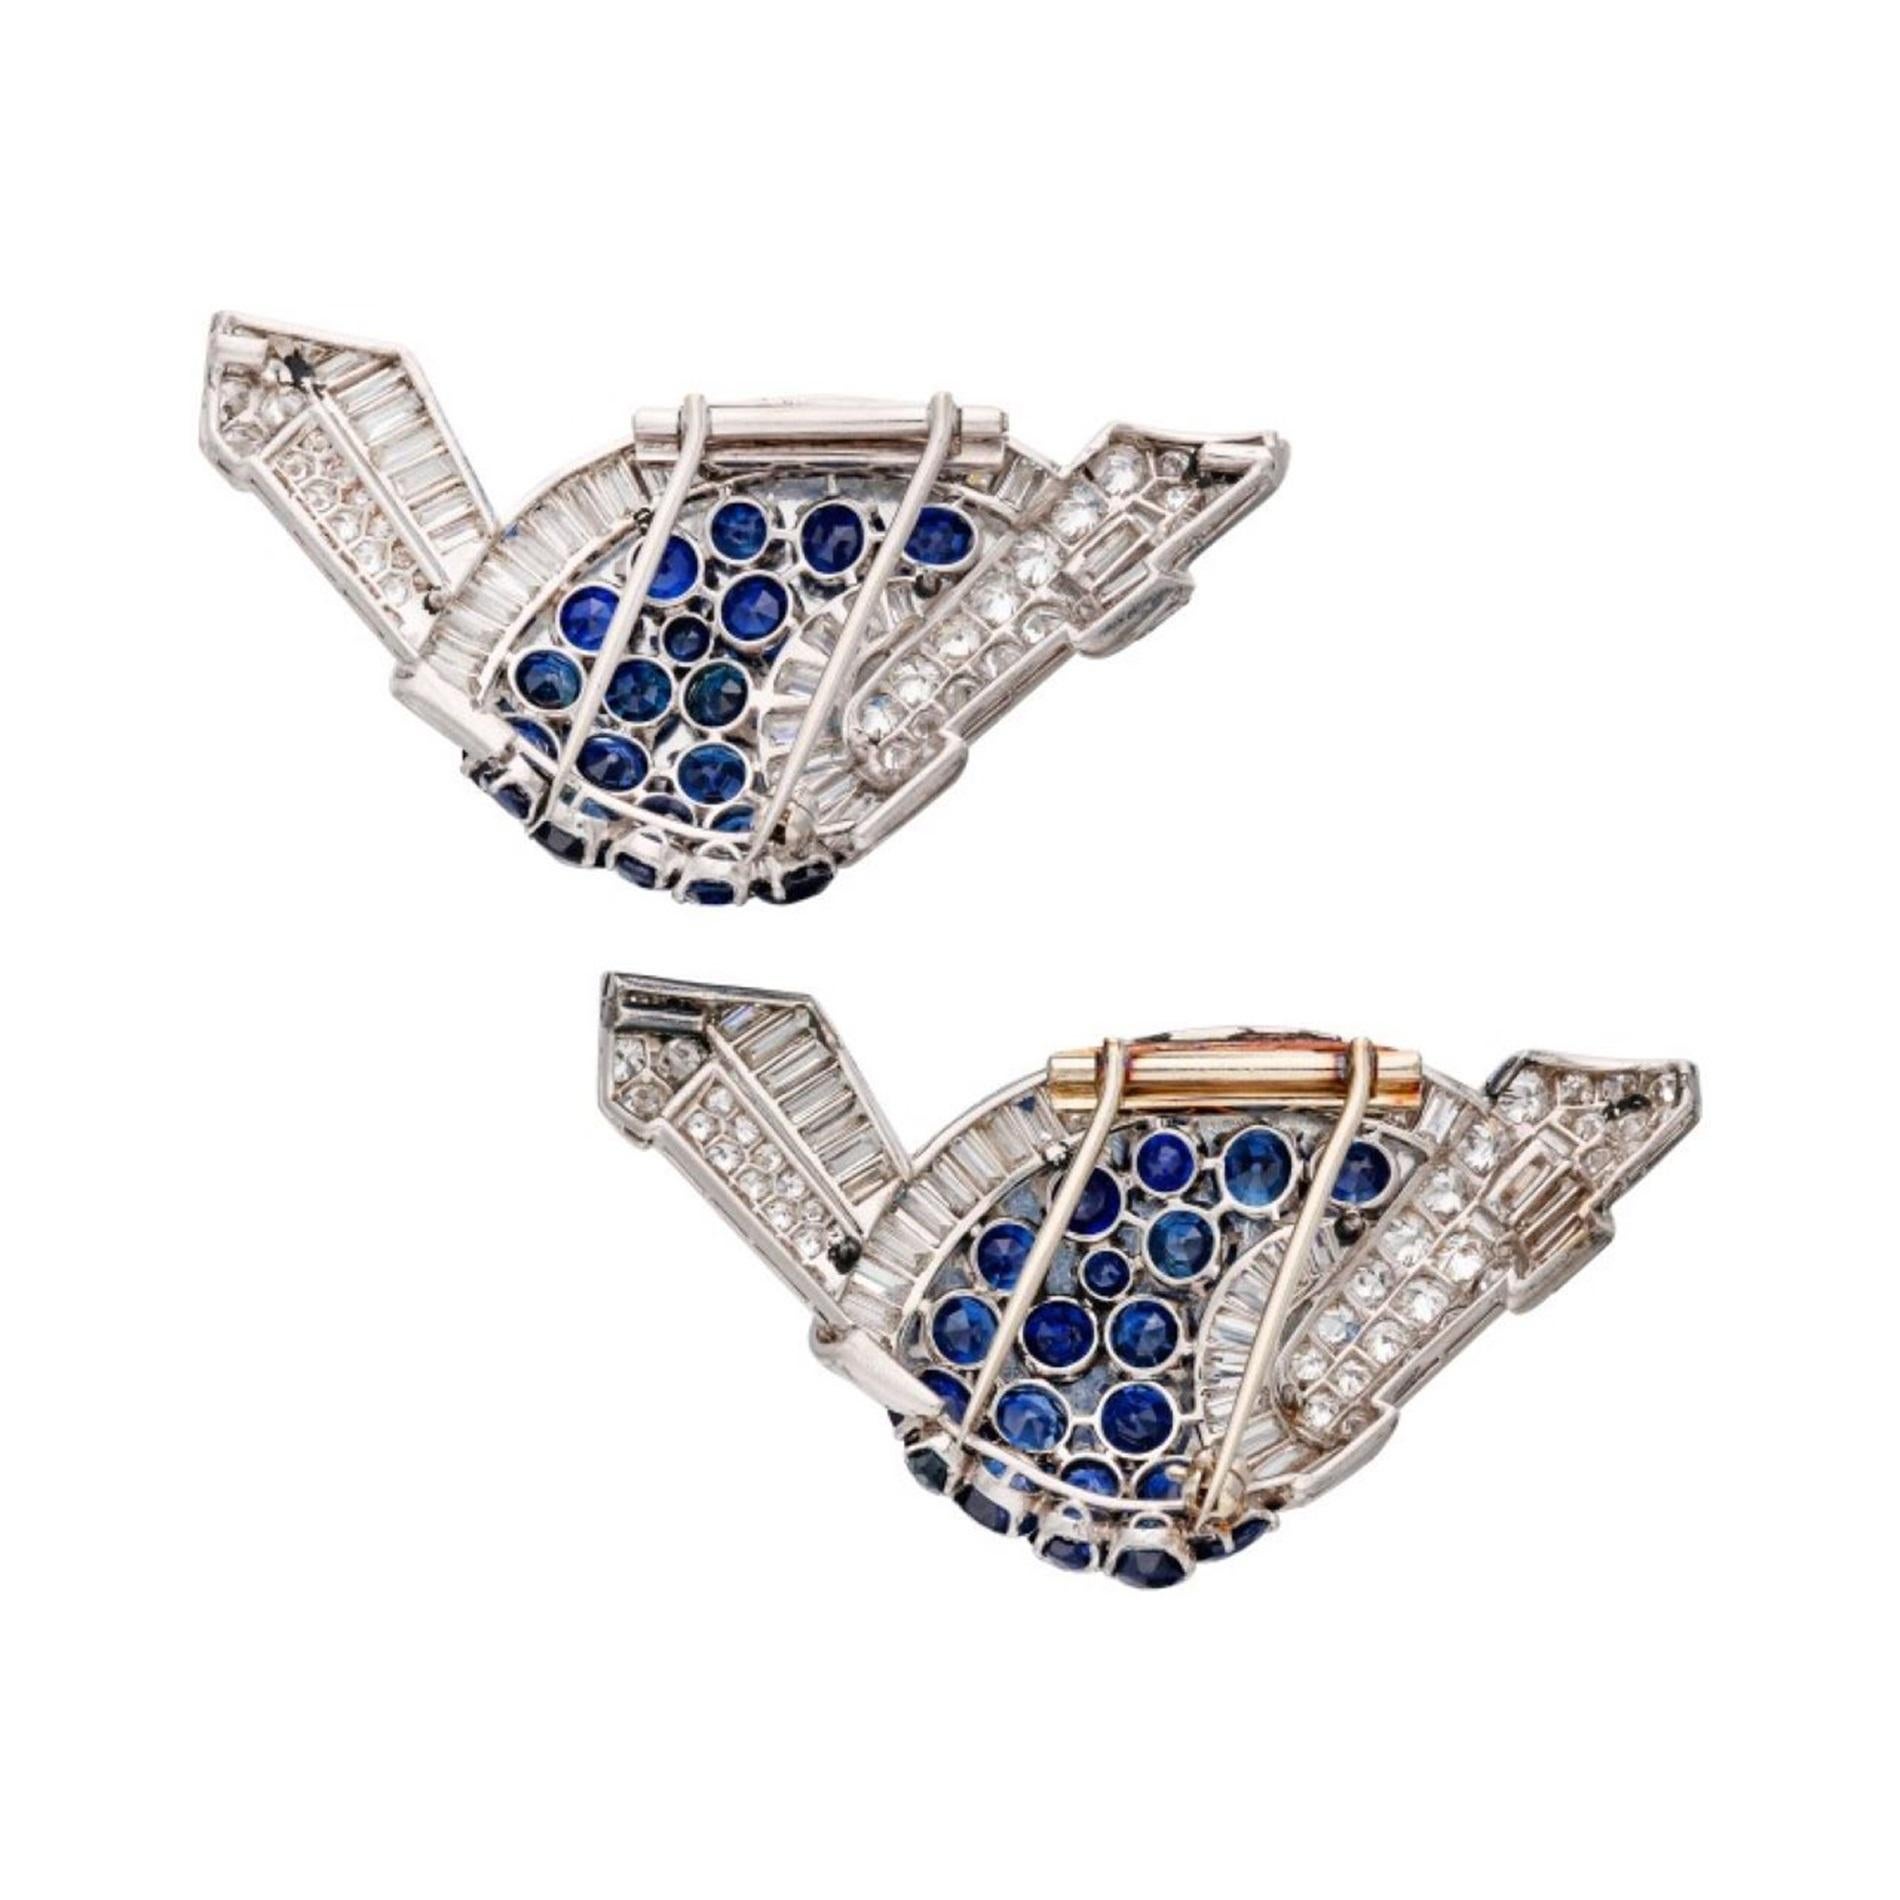 stunning pair of White Gold, Sapphire, and Diamond Clip Brooches, designed to captivate with their exquisite craftsmanship:

Features:

Two beautifully matching clip brooches
Each adorned with 94 round diamonds and 20 round sapphires
Impressive